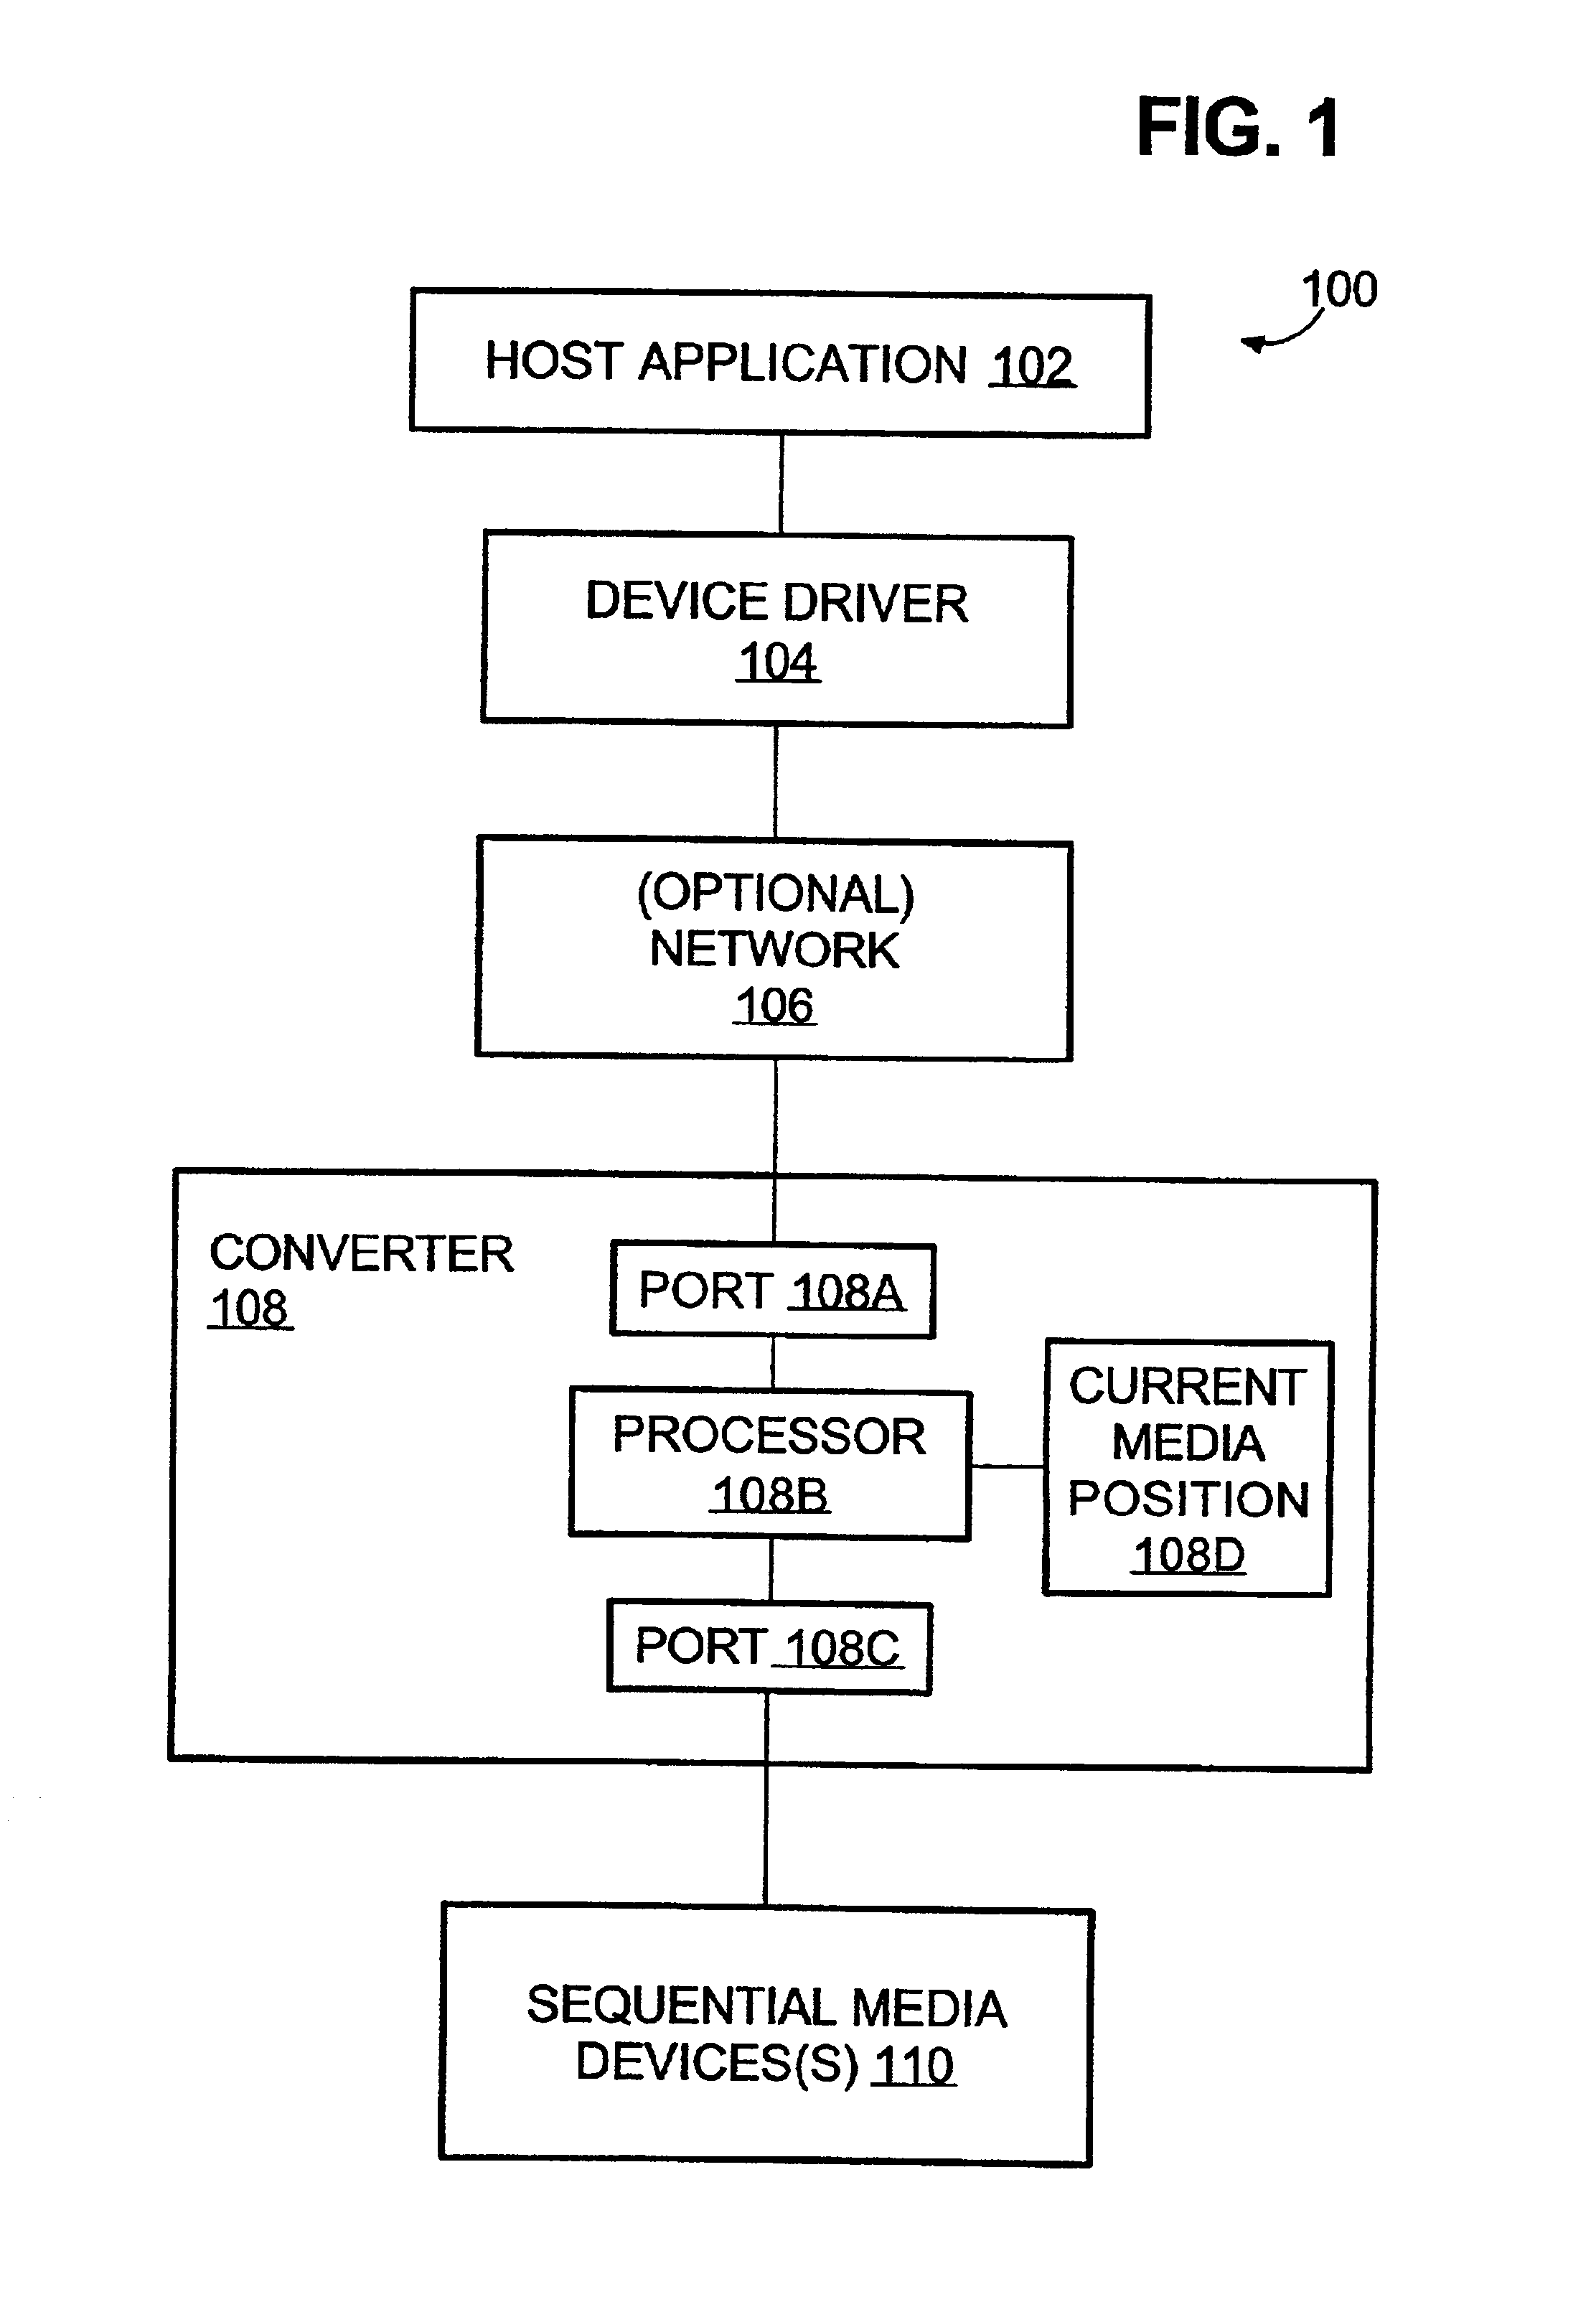 Implicit addressing sequential media drive with intervening converter simulating explicit addressing to host applications